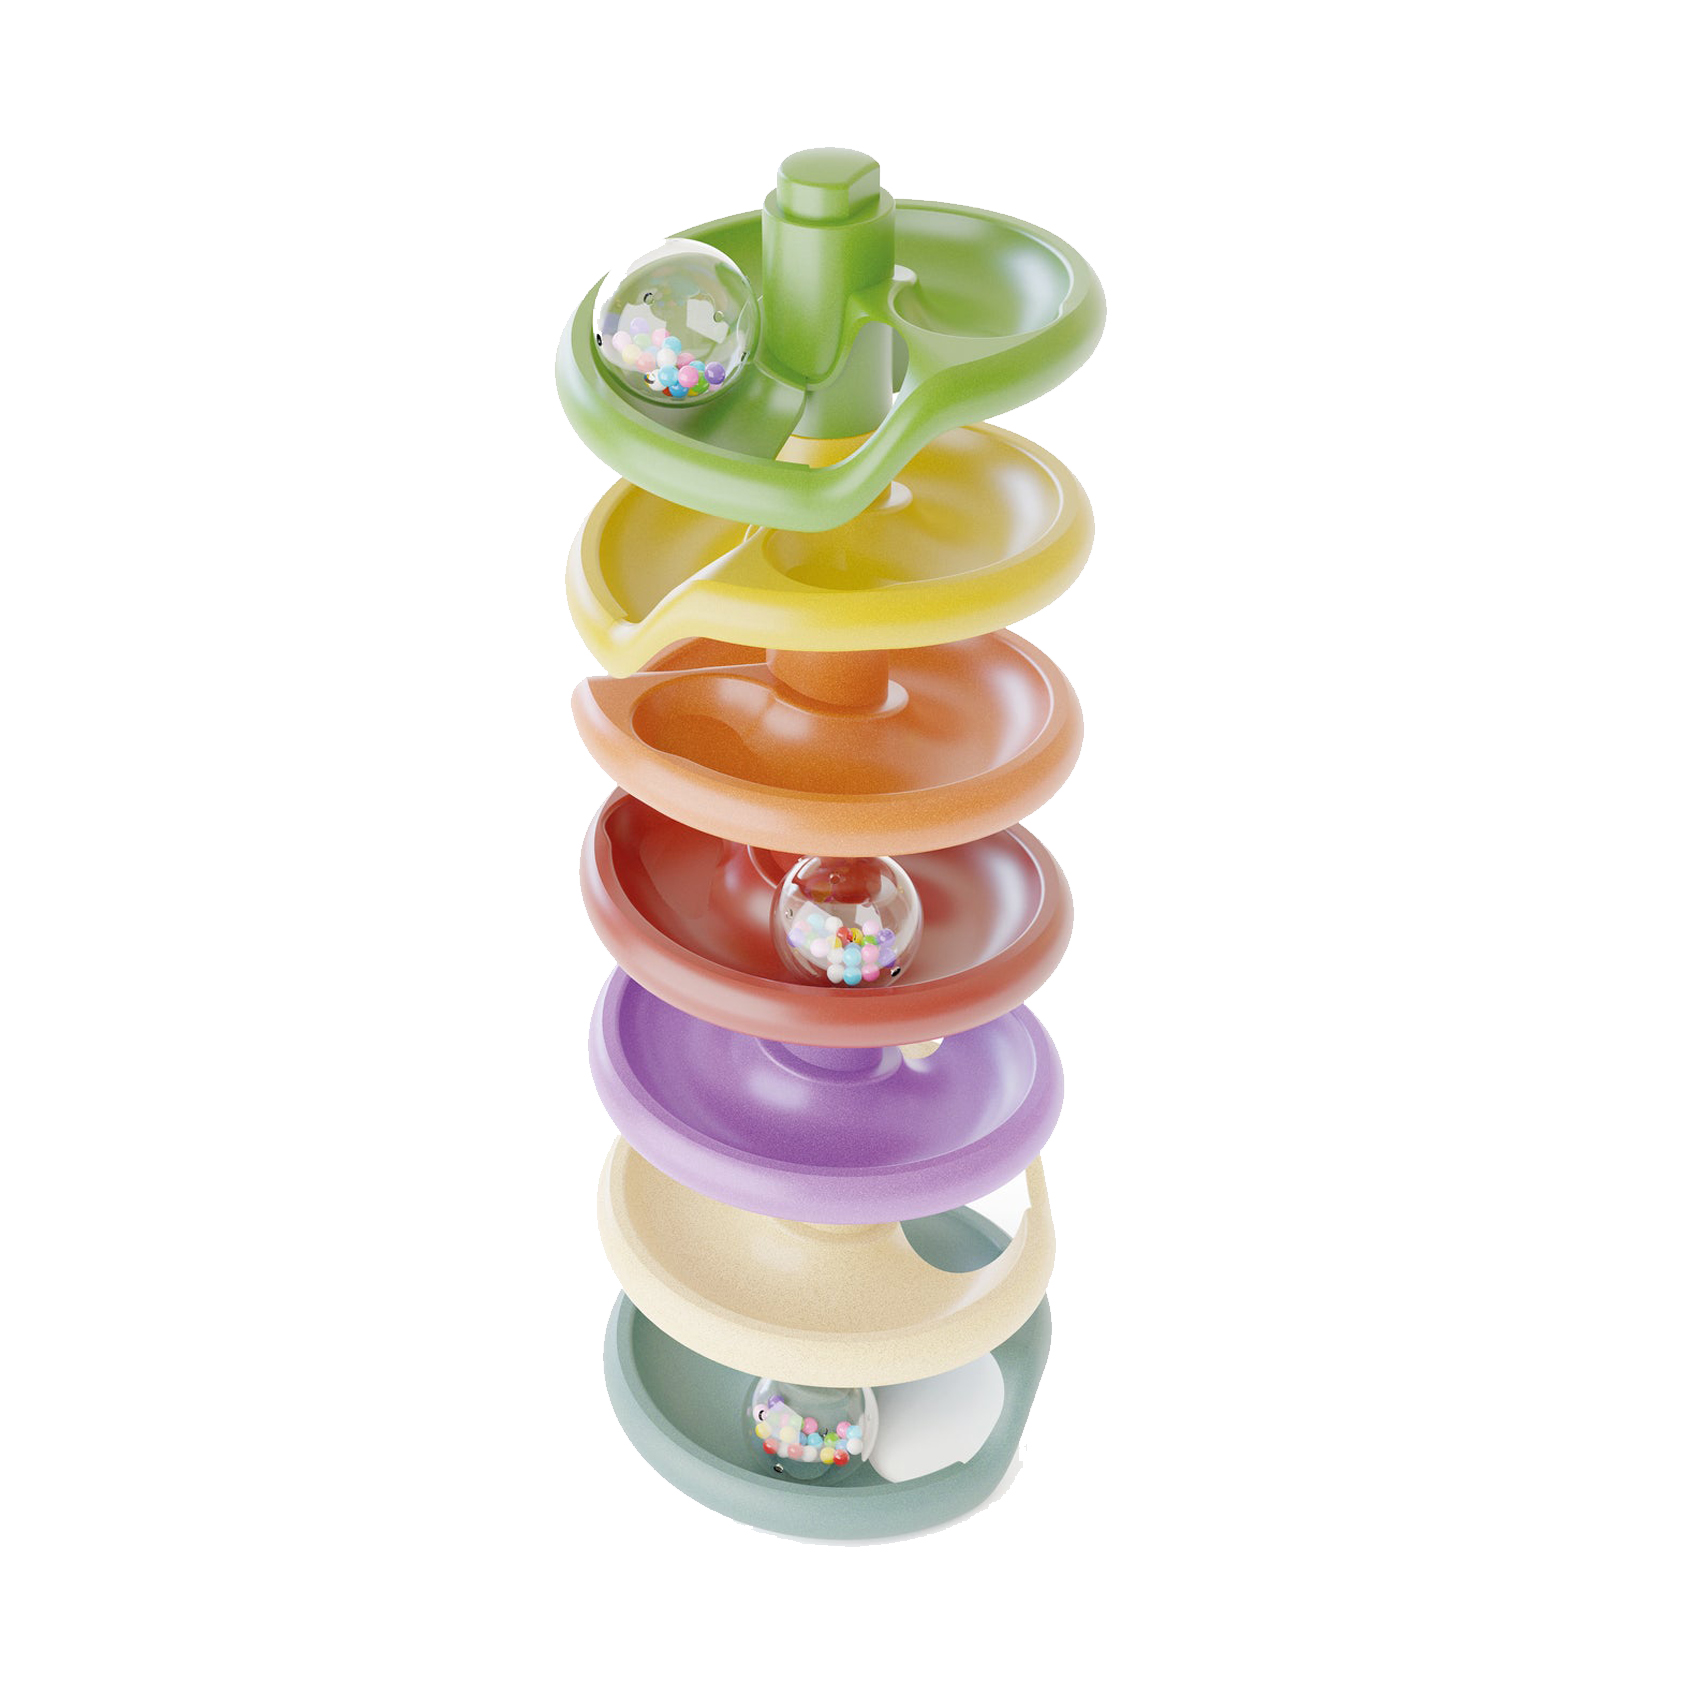 Construction toys quercetti spiral tower playbio